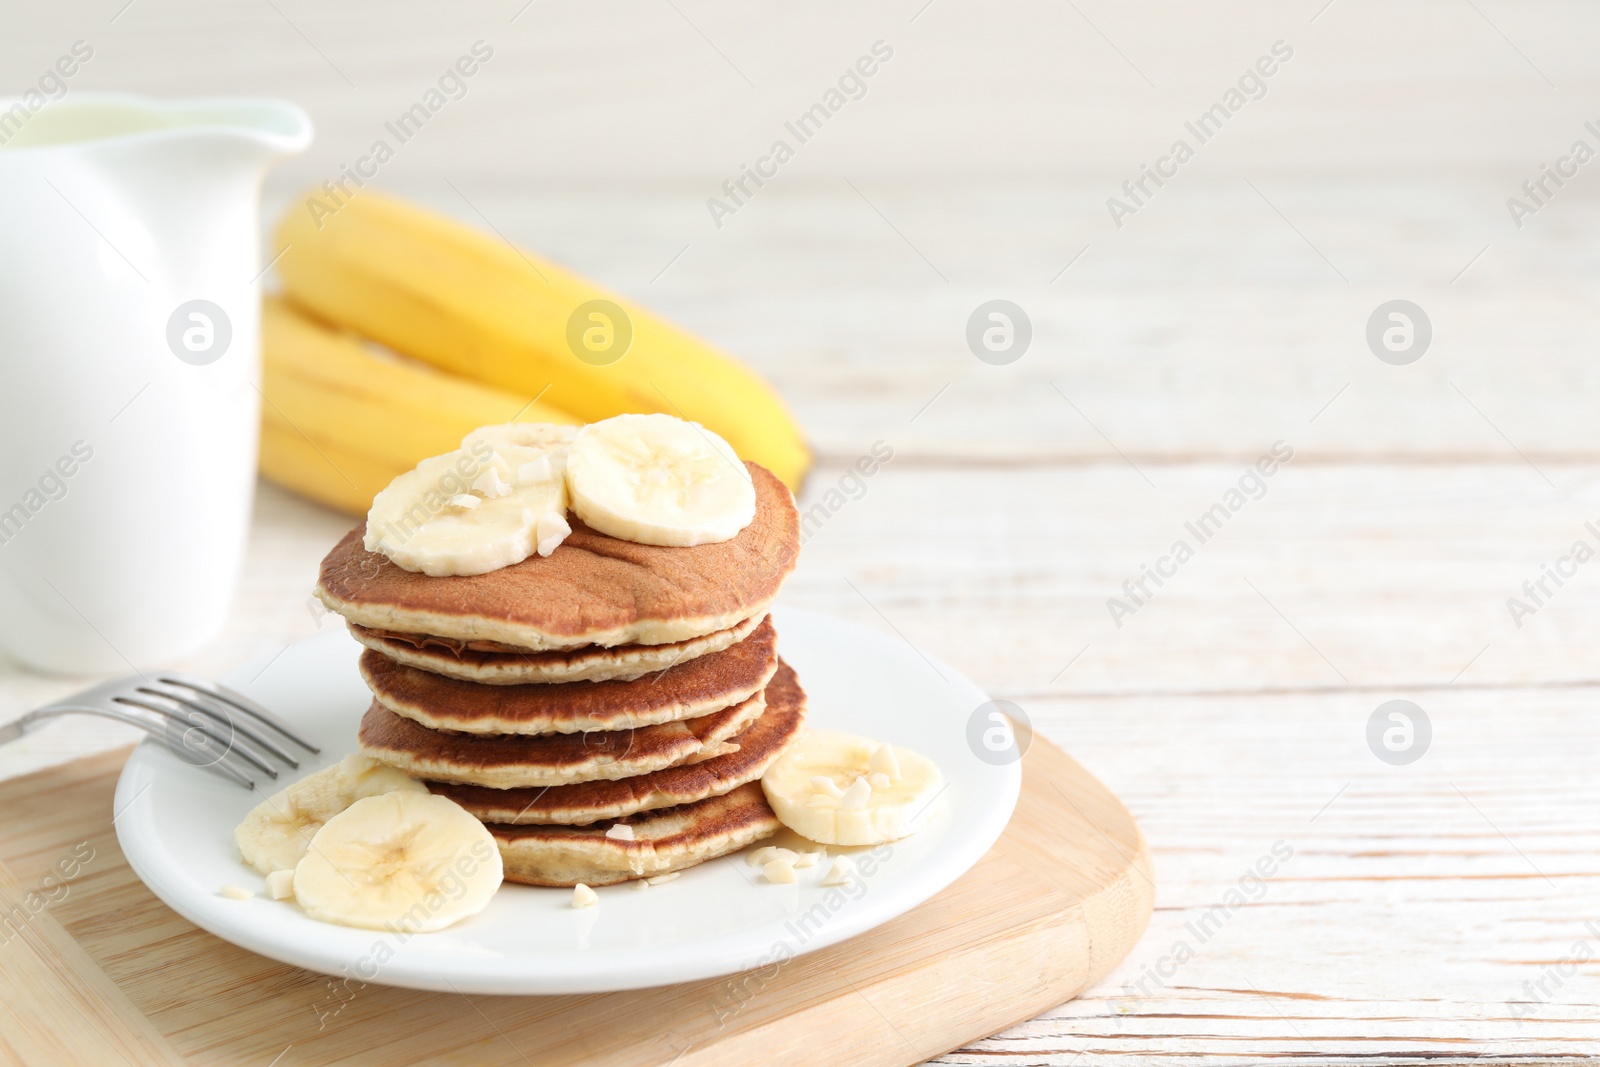 Photo of Platebanana pancakes served on white wooden table. Space for text